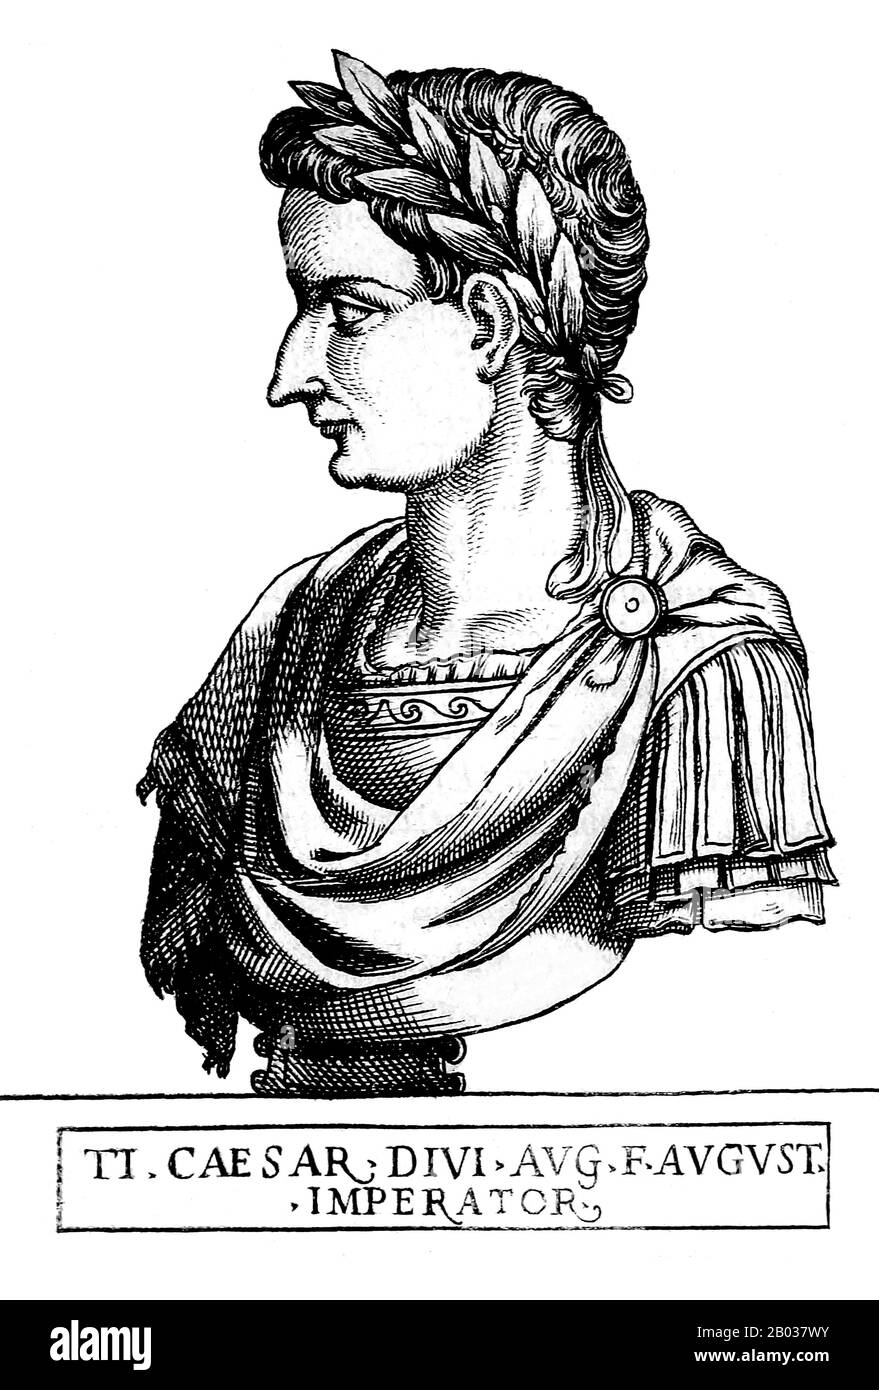 Born Tiberius Claudius Nero, son of Tiberius Claudius Nero and Livia Drusilla, he became step-son of Octavian (later to become Augustus, first emperor of Rome) after his mother was forced to divorce Nero and marry him.  Tiberius would eventually marry Augustus' daughter from his previous marriage, Julia the Elder, and later be adopted by Augustus, officially becoming a Julian, bearing the name Tiberius Julius Caesar.  In relations to the other emperors of this dynasty, Tiberius was the stepson of Augustus, grand-uncle of Caligula, paternal uncle of Claudius, and great-grand uncle of Nero.  Tib Stock Photo